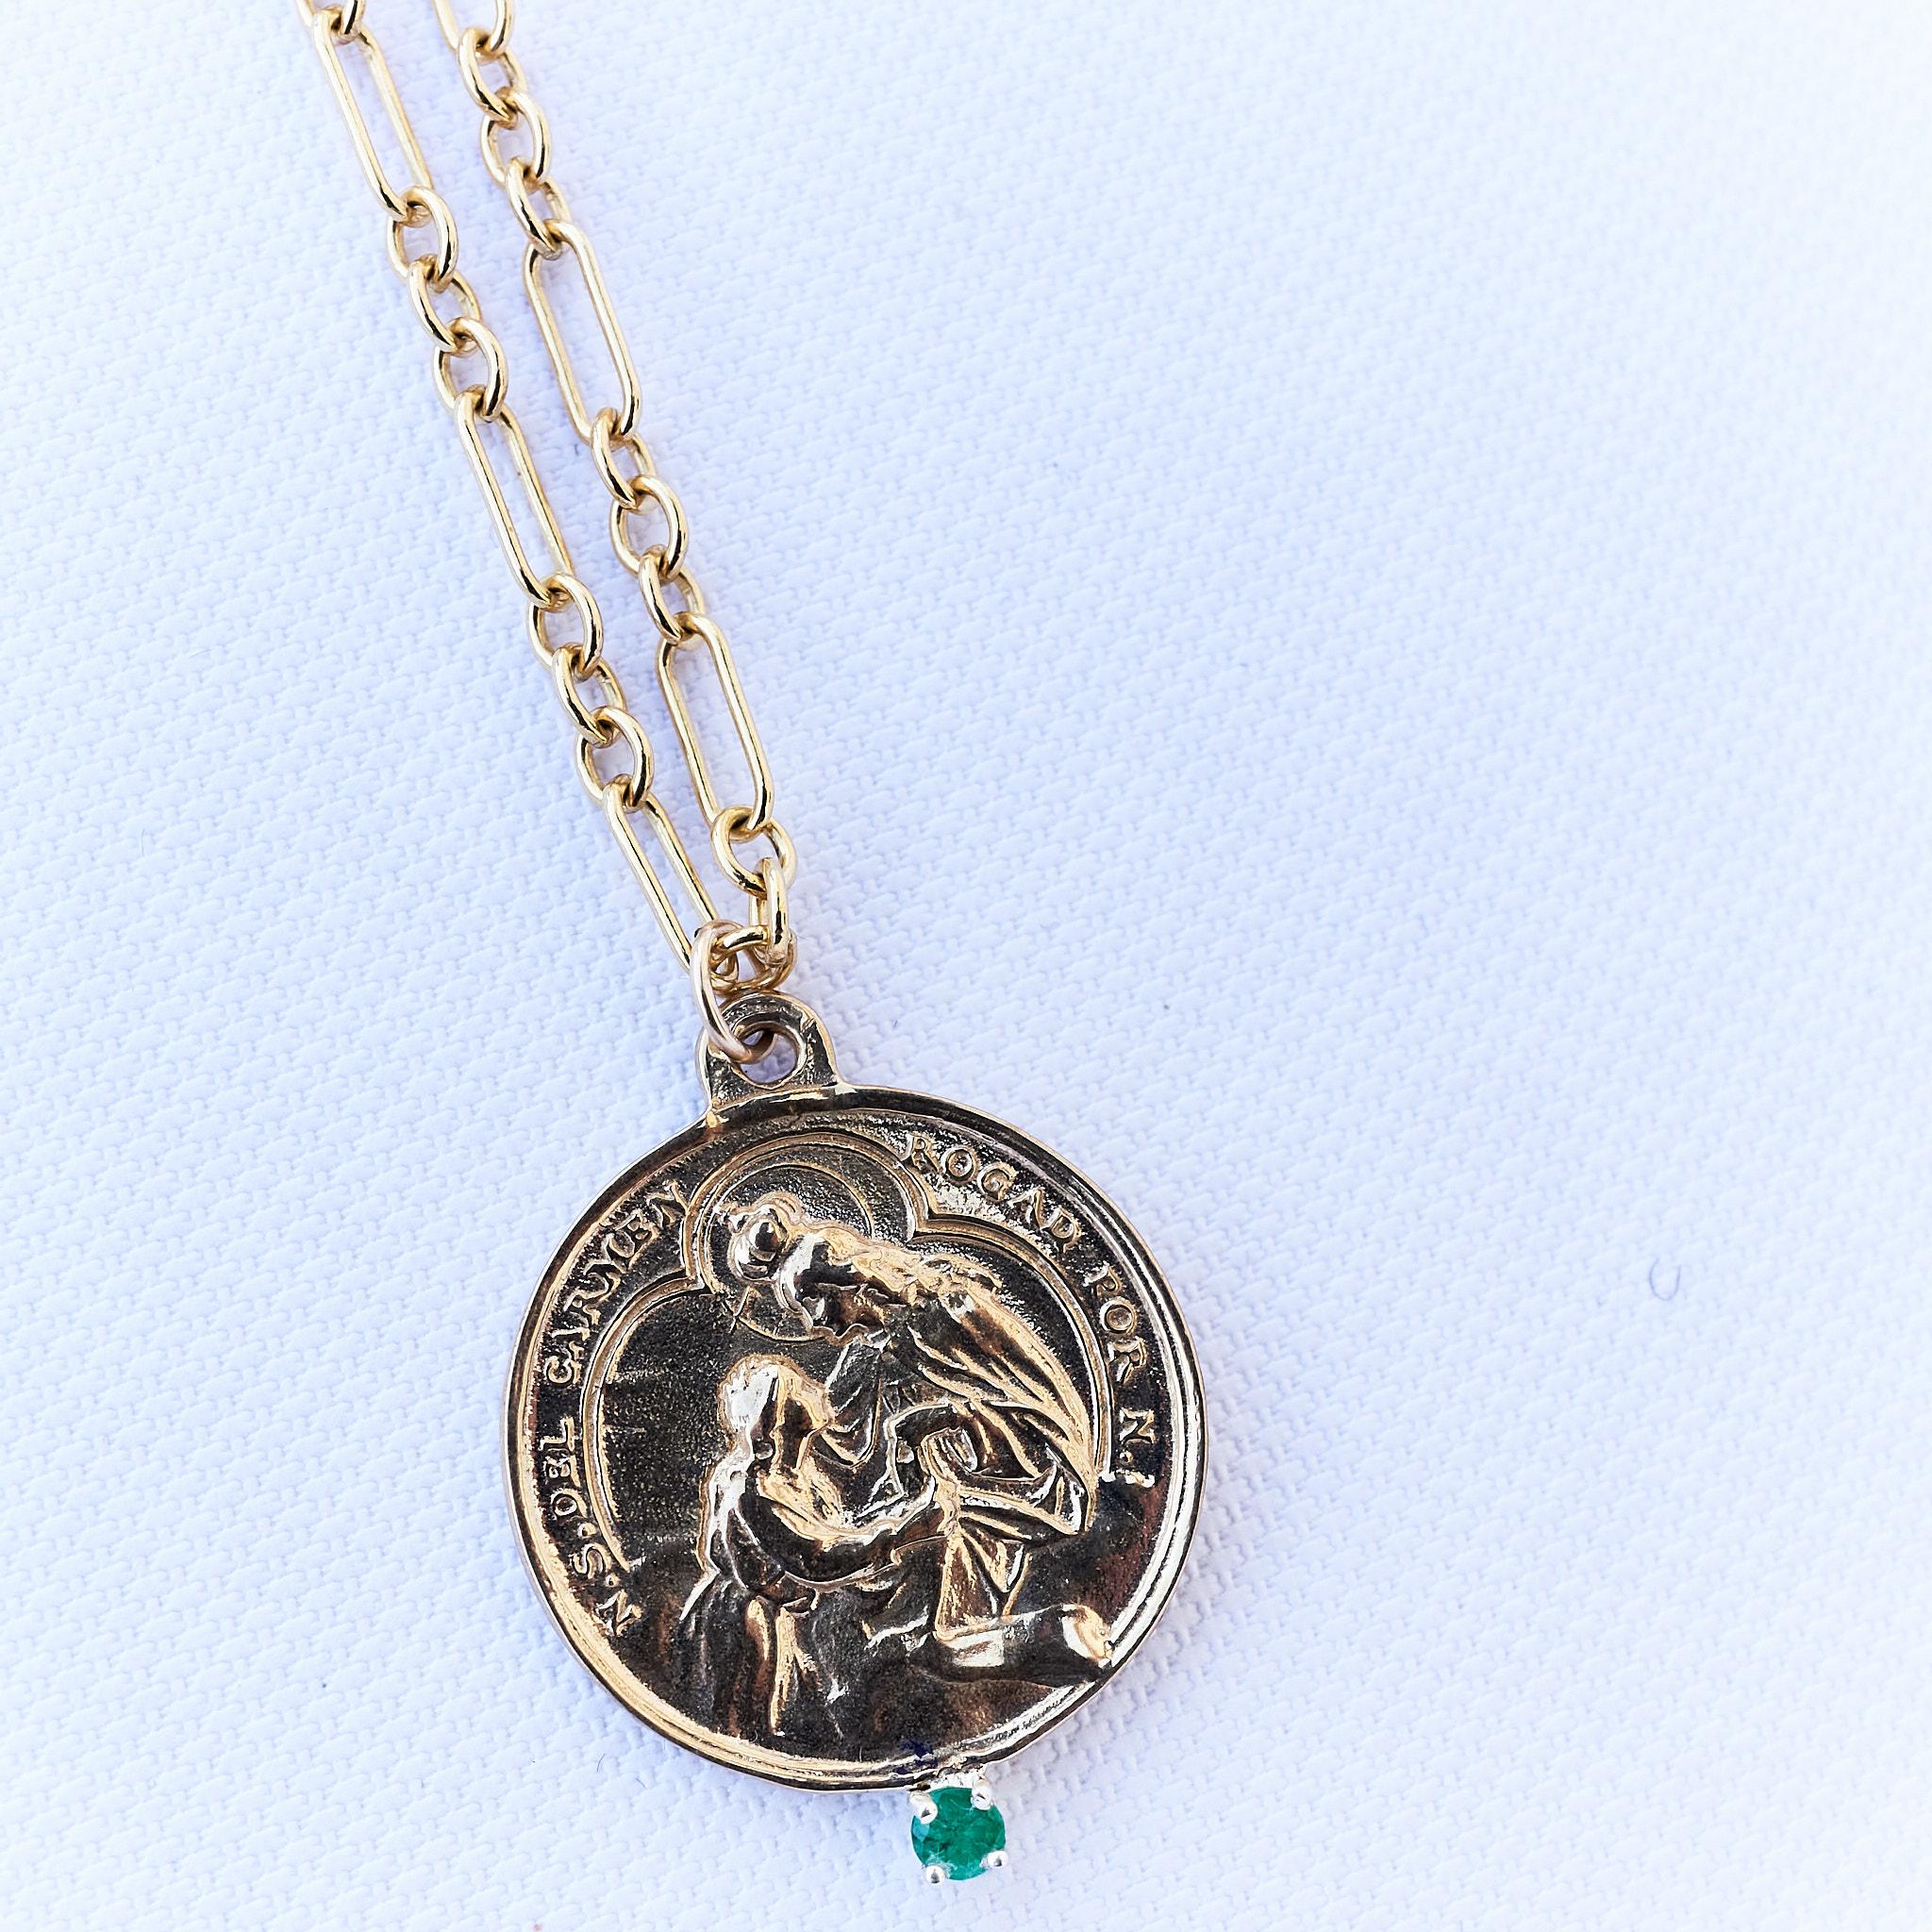 Contemporary Emerald Medal Necklace Virgin Mary Chain J Dauphin For Sale